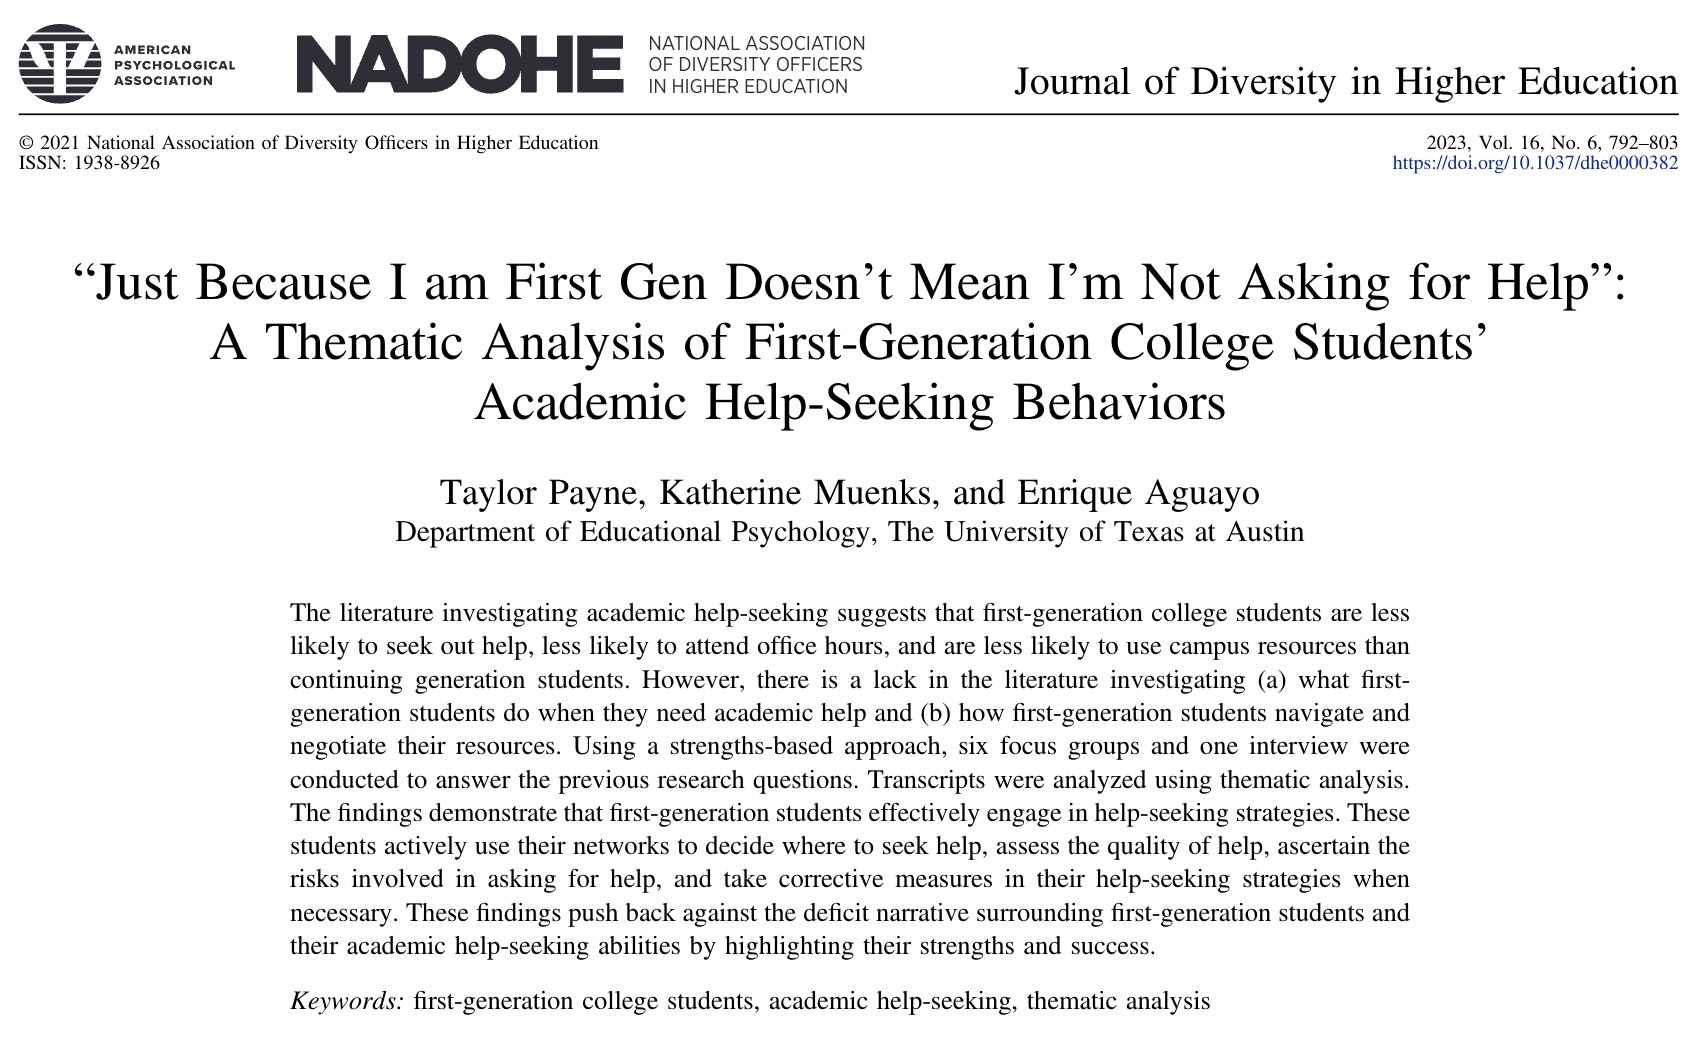 Screenshot of the title and abstract of the scholarly article titled "Just Because I am First Gen Doesn't Mean. I'm Not Asking for Help": A Thematic Analysis of First-Generation College Students' Academic Help-Seeking Behaviors in the Journal of Diversity in Higher Education published in 2021.